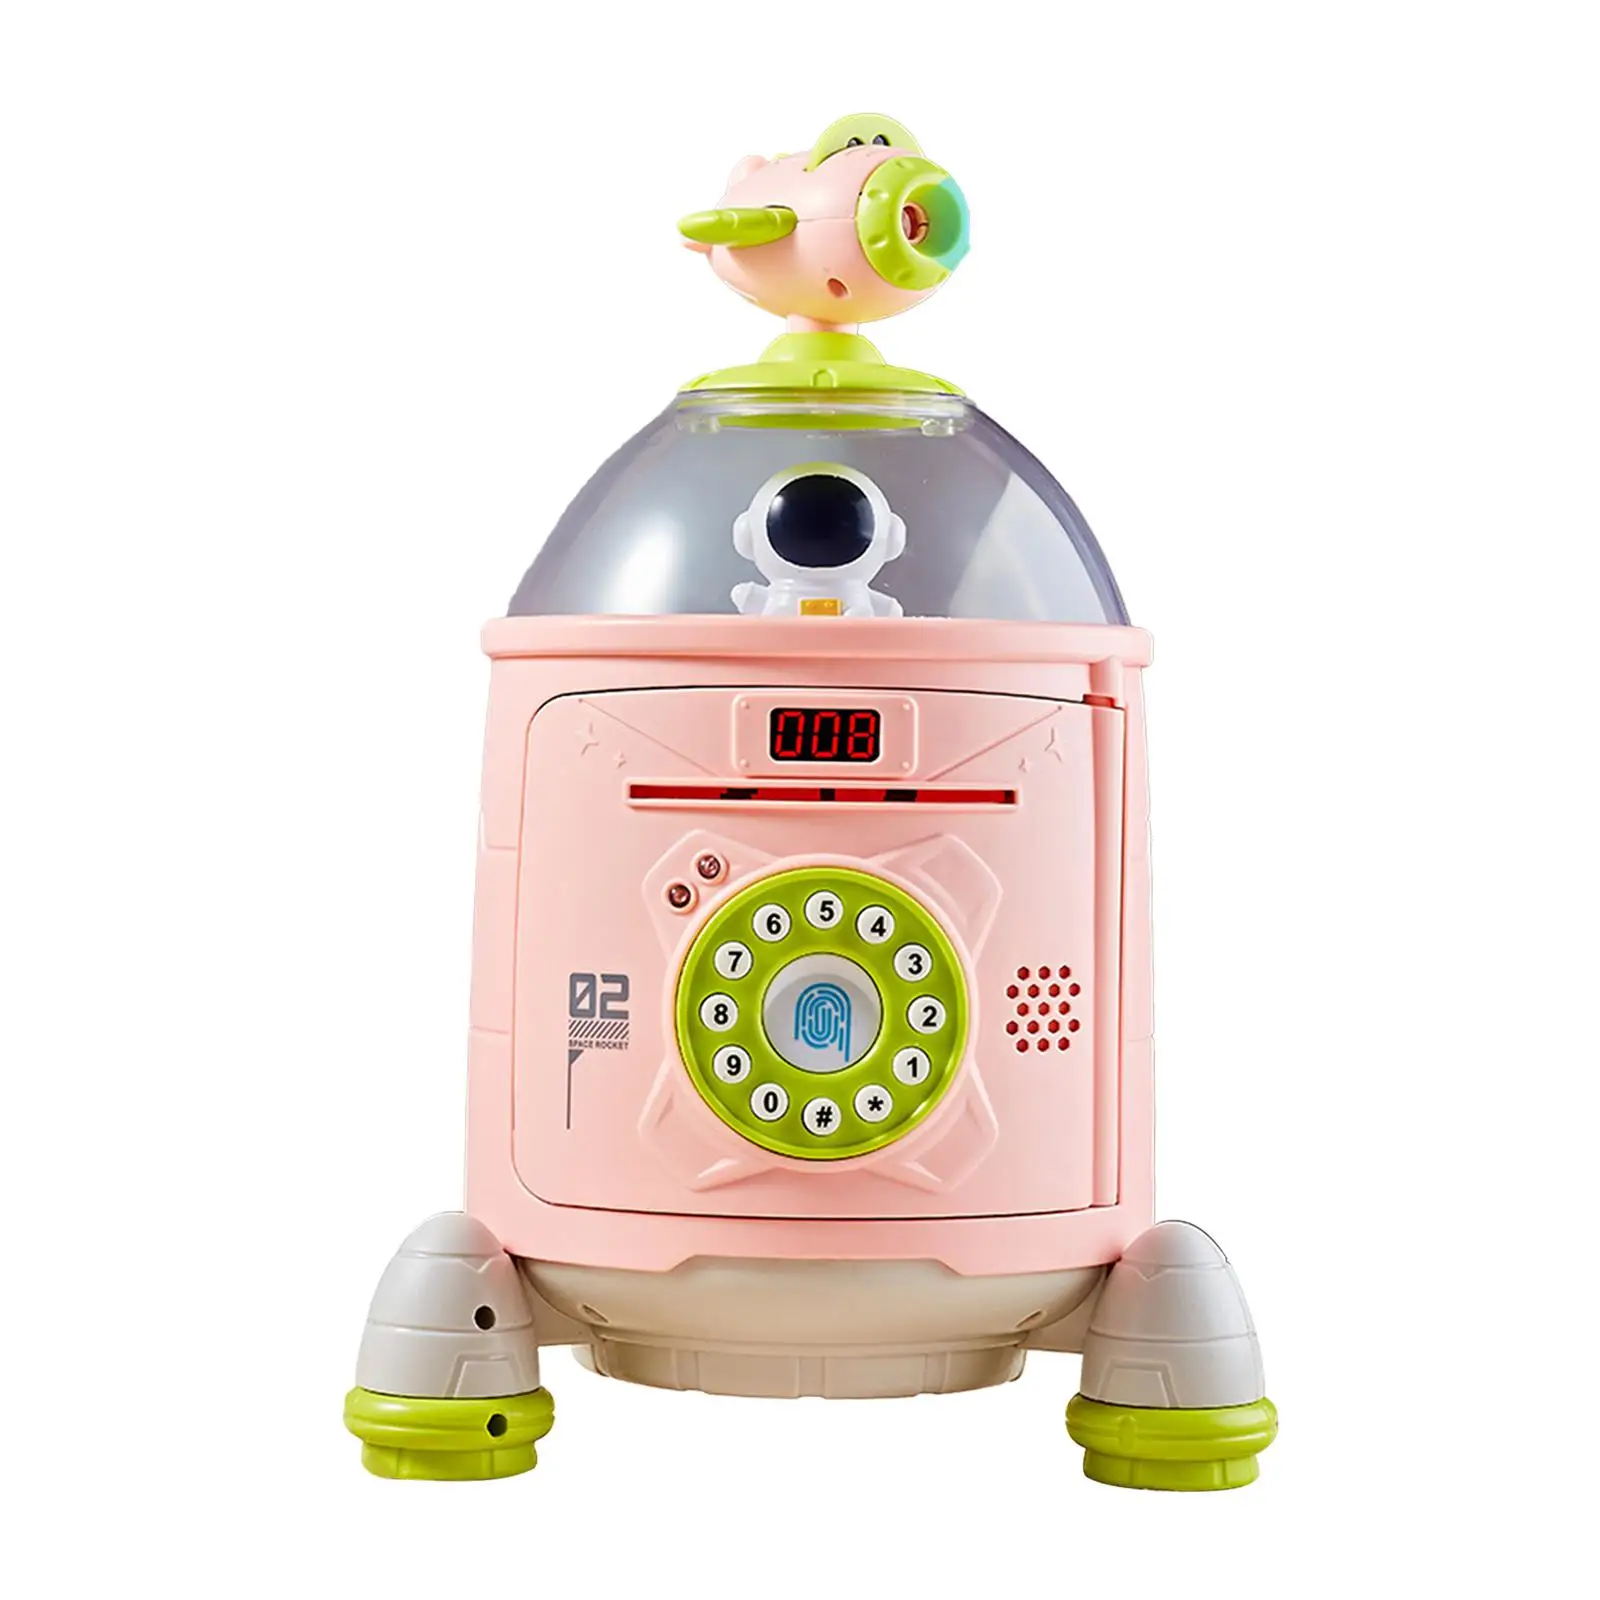 Rocket Piggy Bank Multifunction with Fingerprint and Password Code Lock Educational Toy Safe for Age 3-8 Years Kids Teens Adults